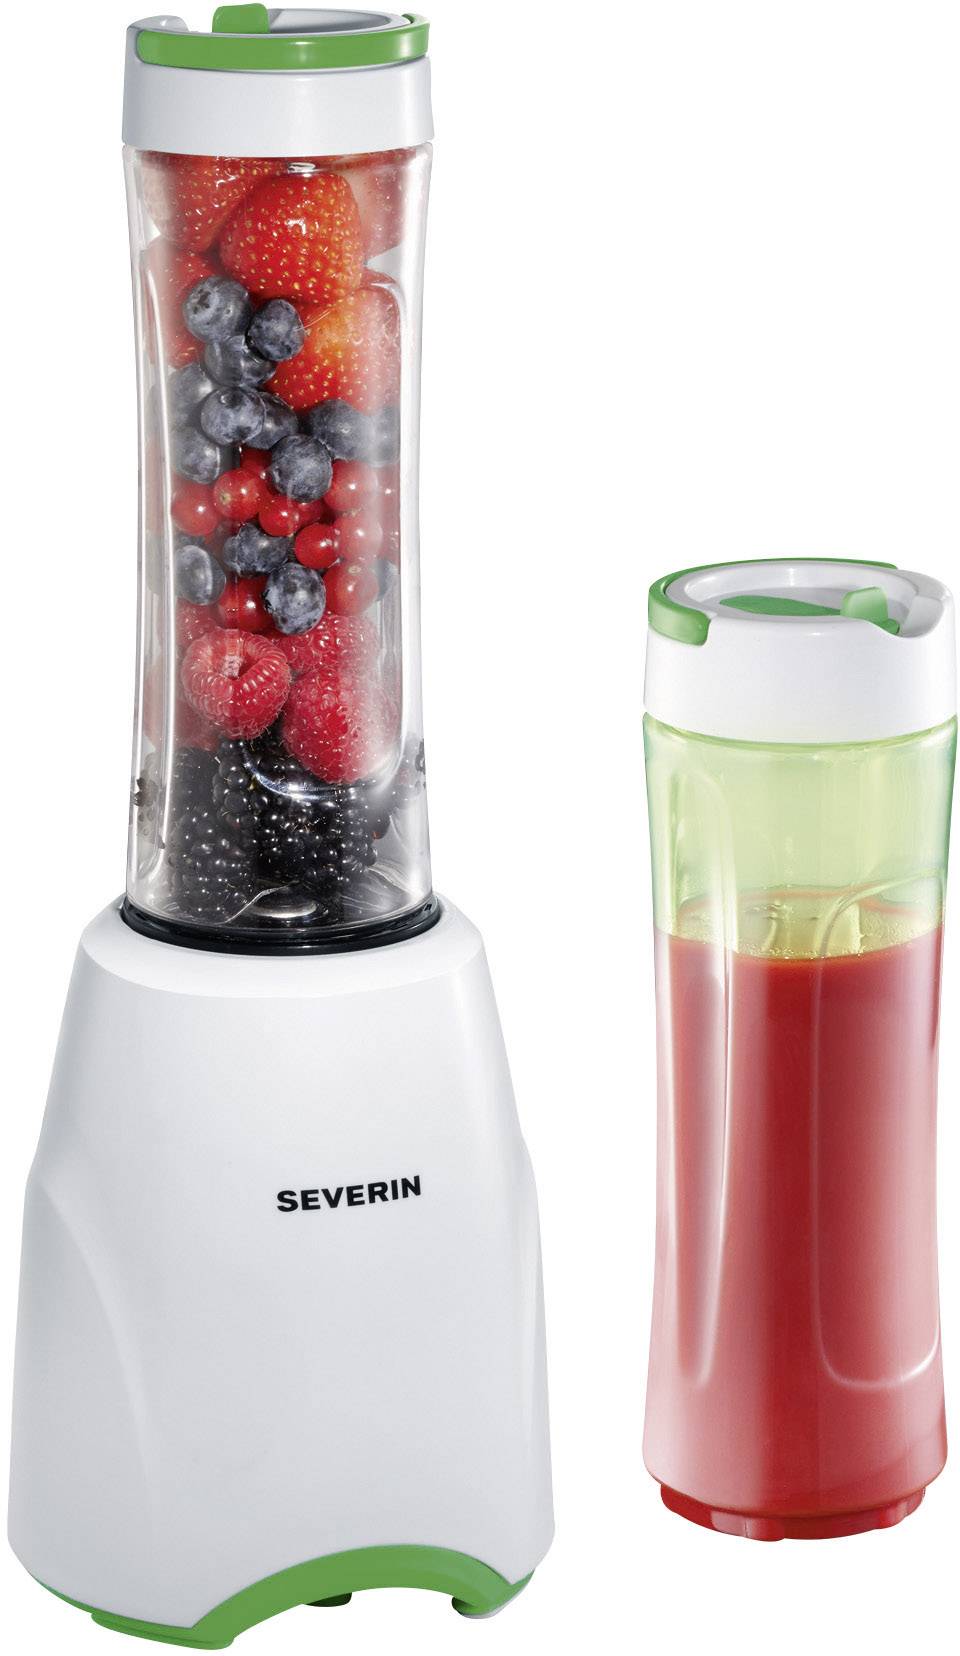 SEVERIN Seve Standmixer Smoothie Mix & Go wh/gn